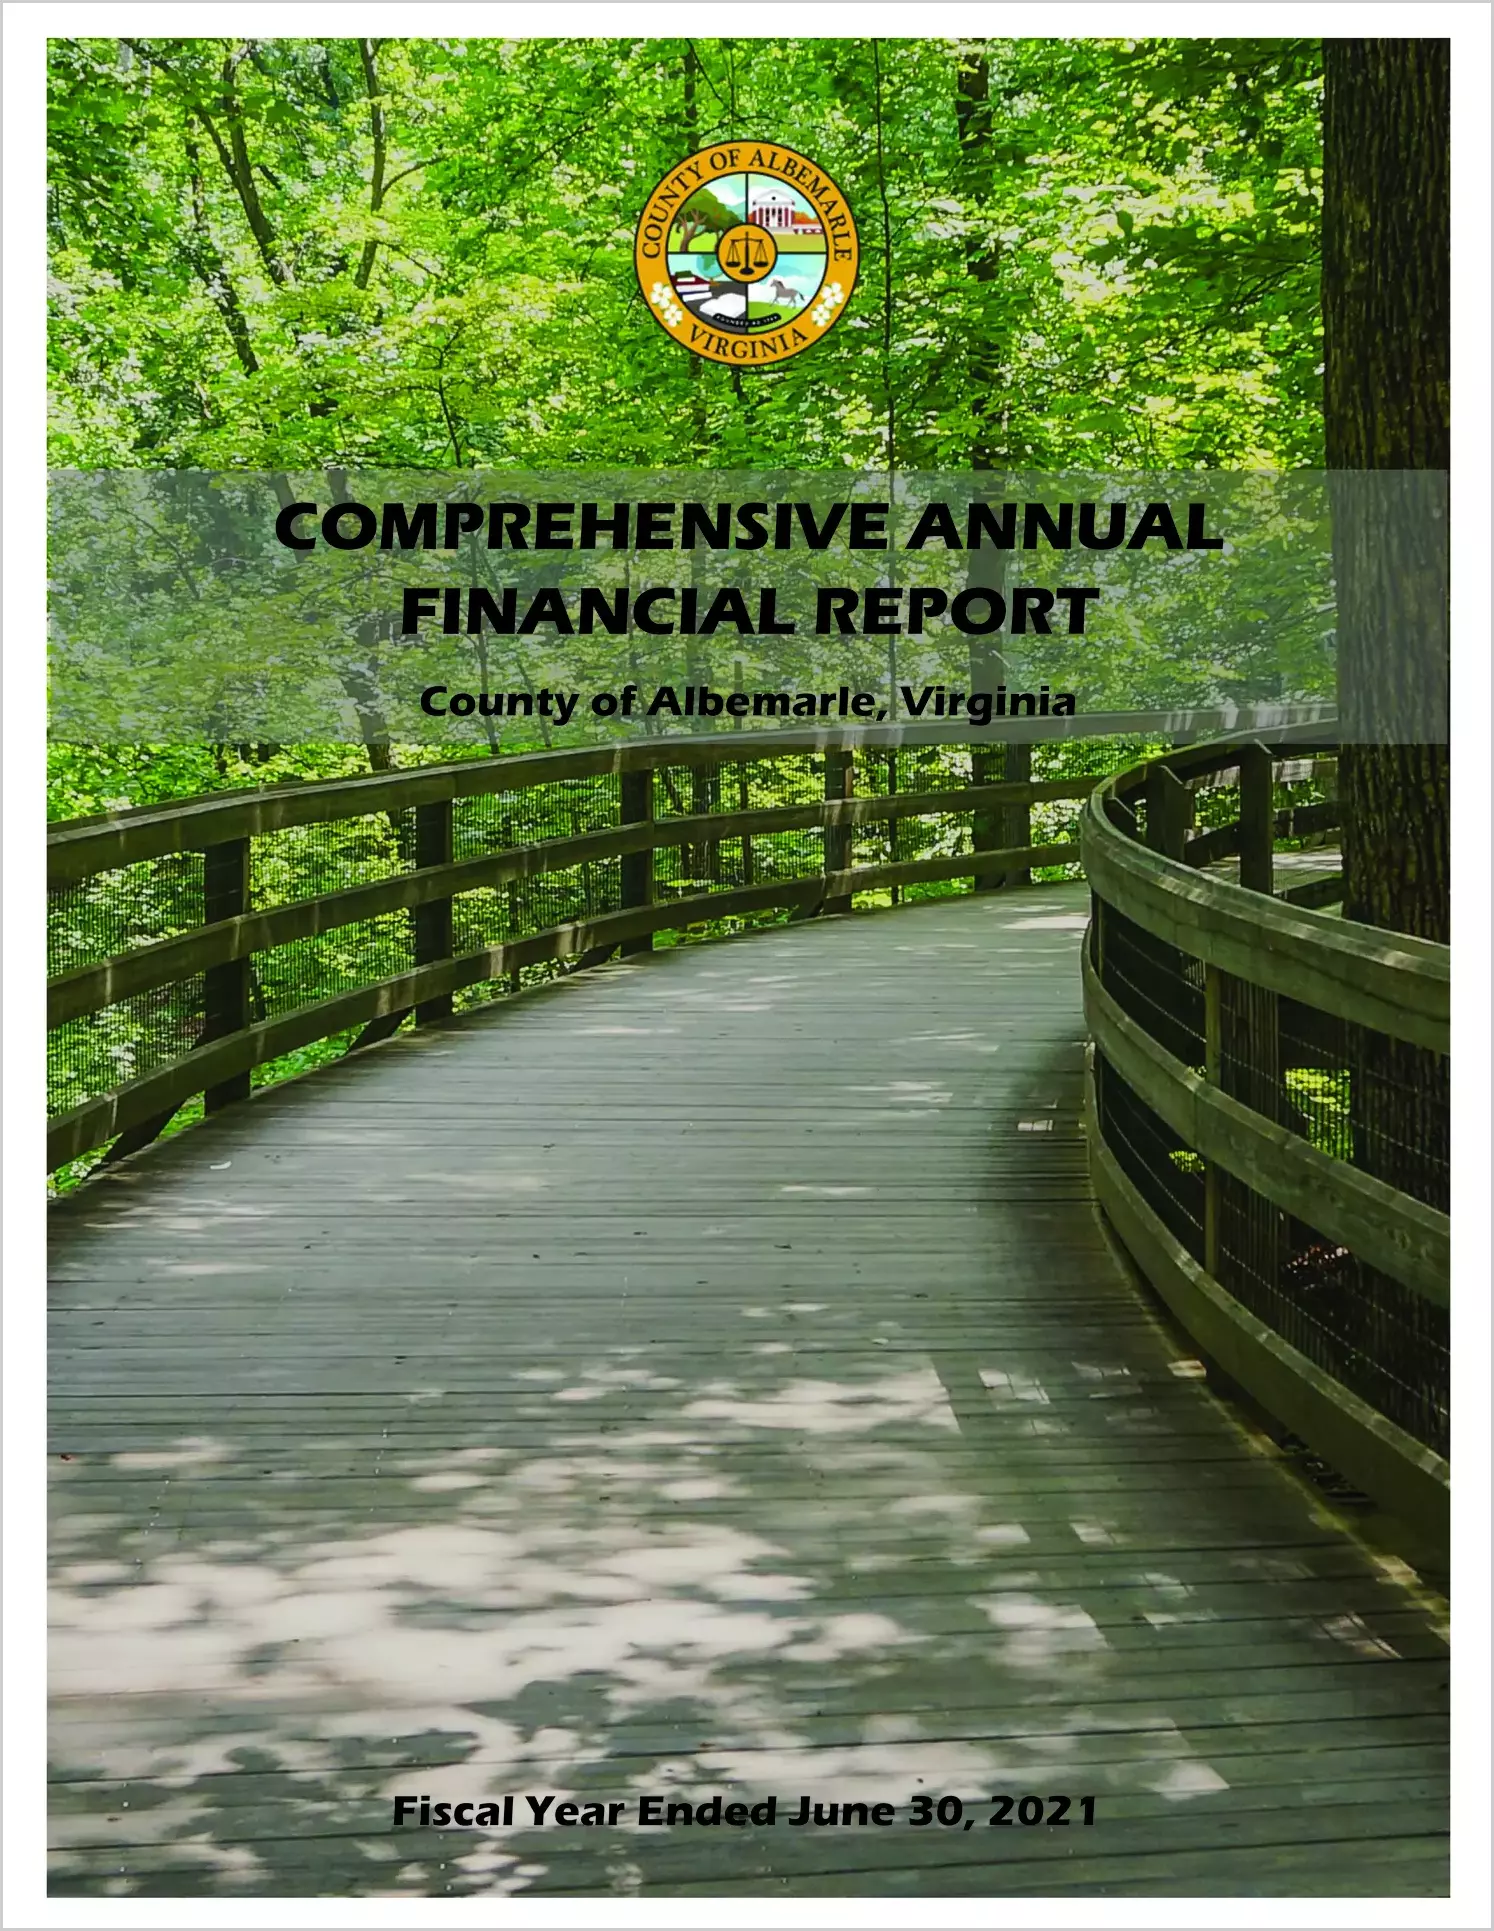 2021 Annual Financial Report for County of Albemarle